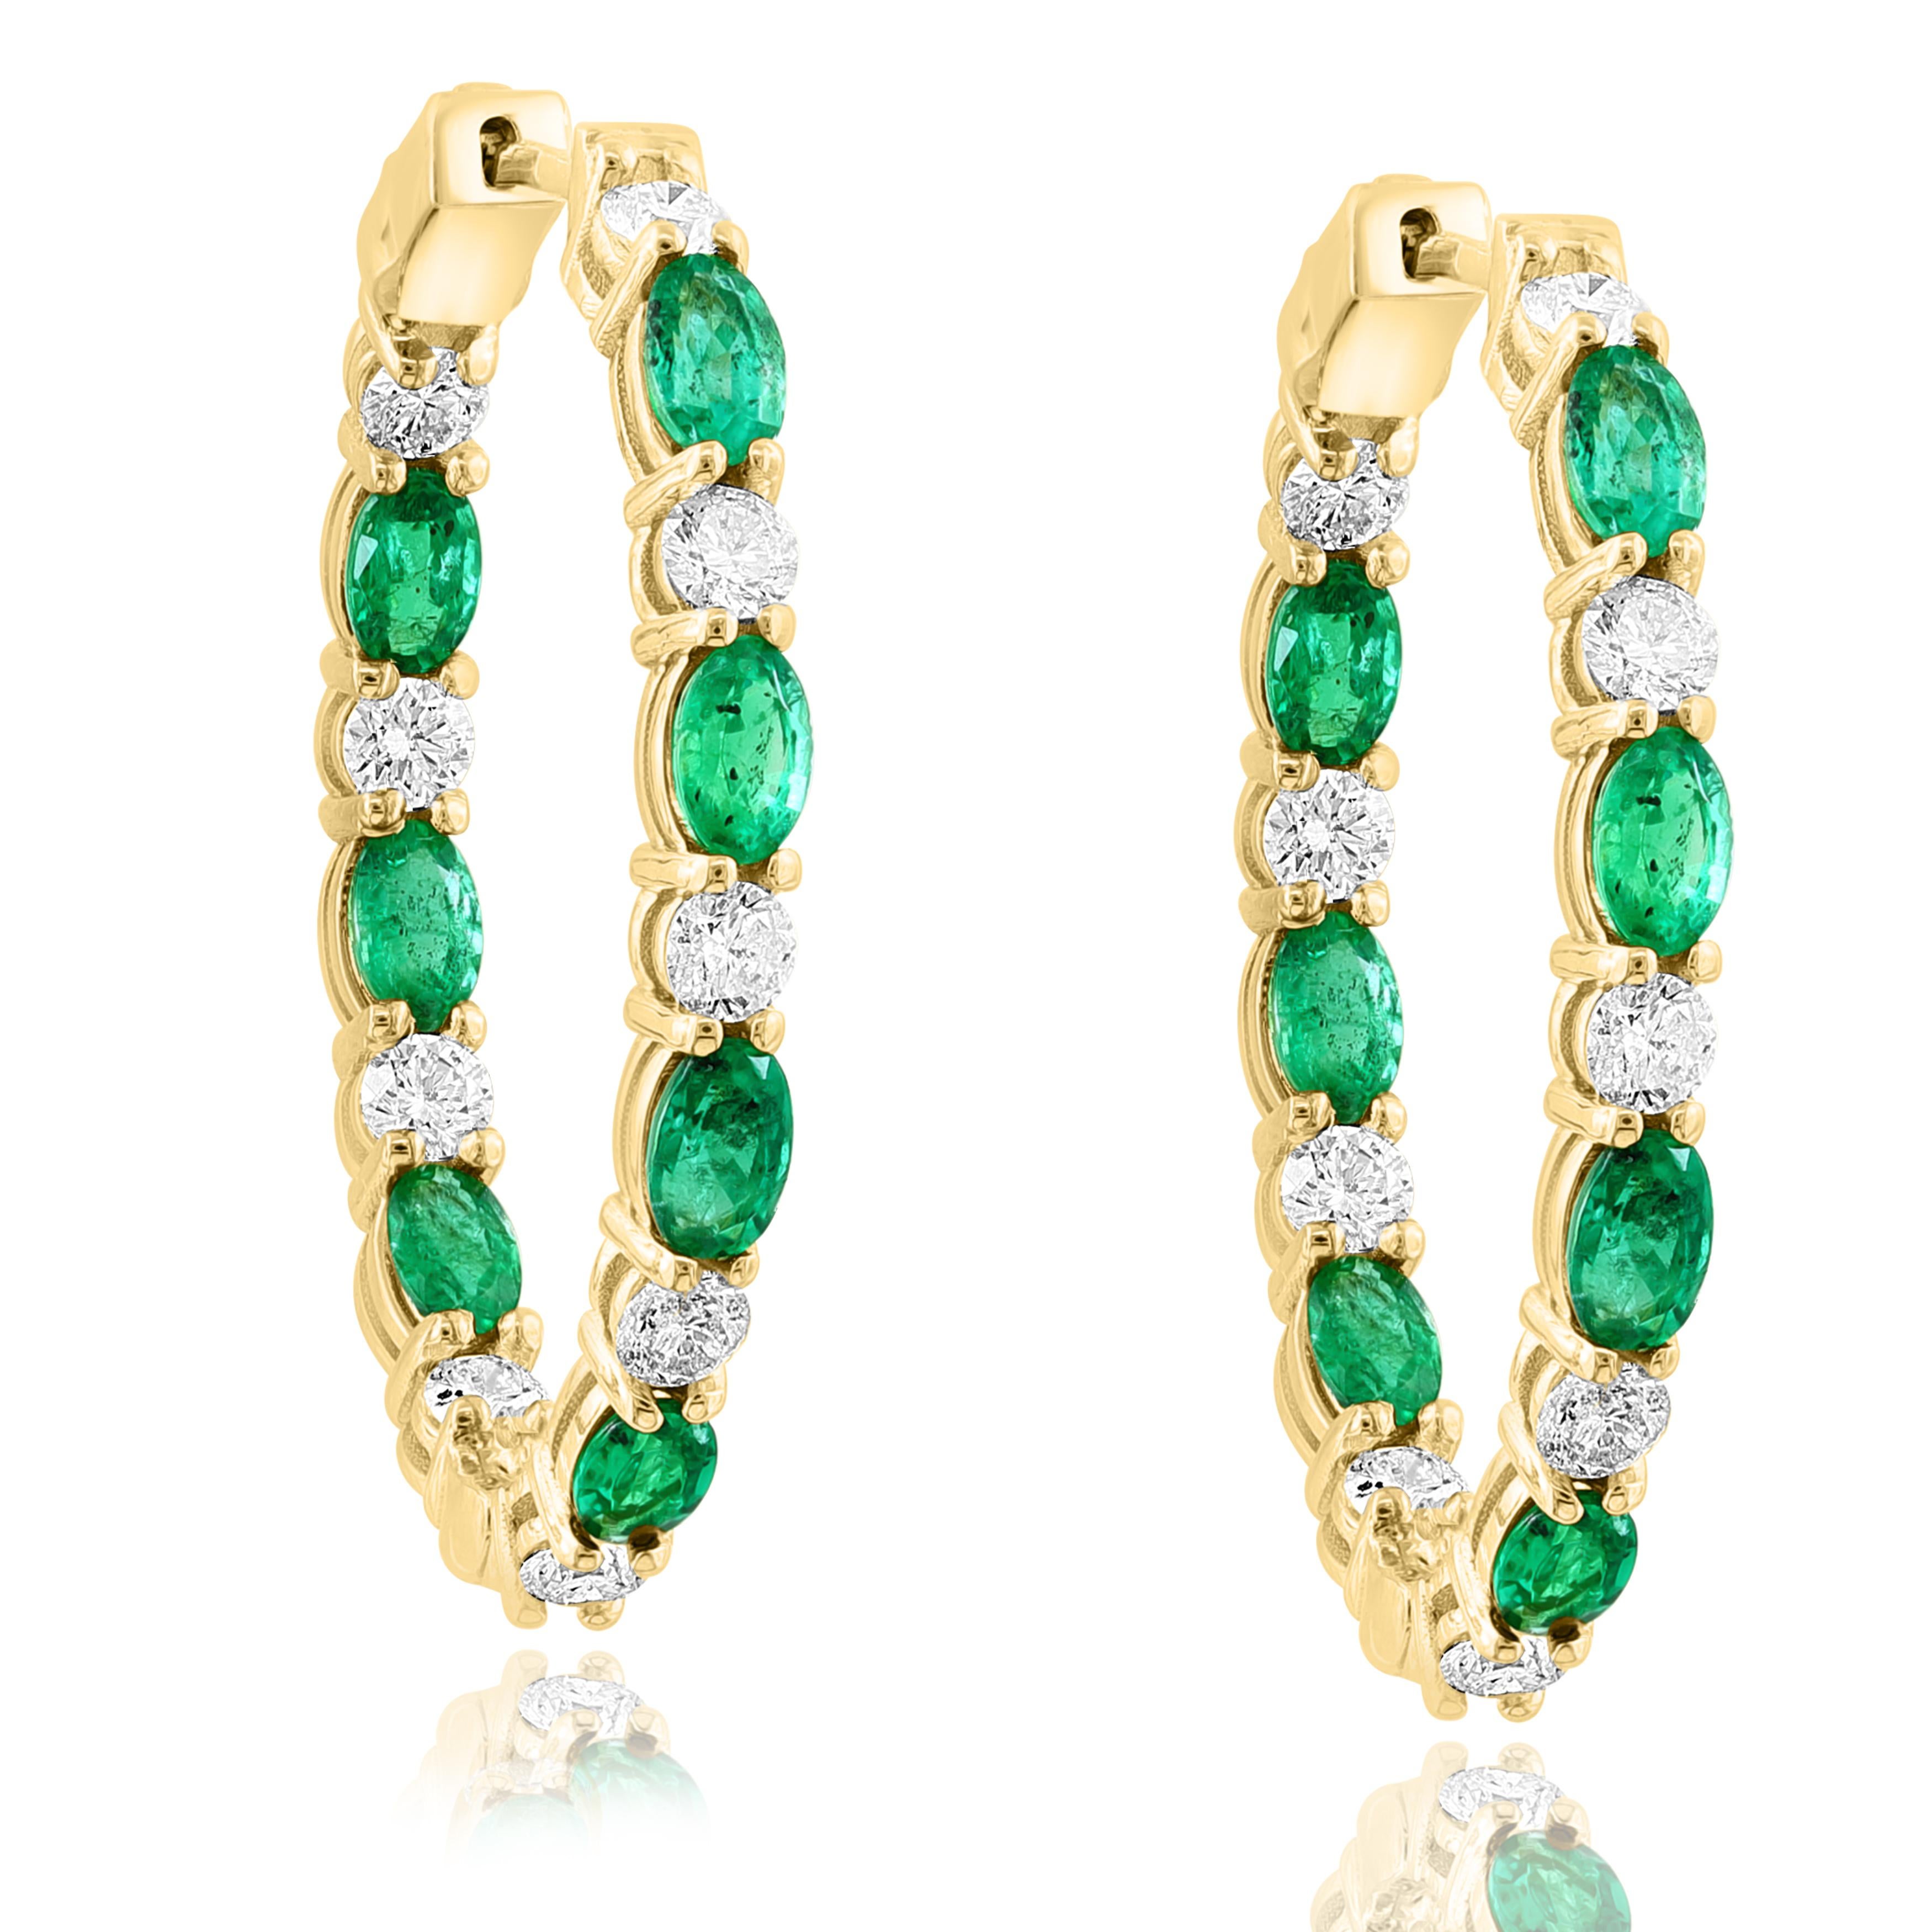 A stylish and versatile style hoop earring showcasing oval cut 14 Emerald weighing 3.13 carats total, channel set in a diamond-encrusted 14-karat Yellow gold mounting. 18 Diamonds weigh 1.79 carats in total.

All diamonds are GH color SI1